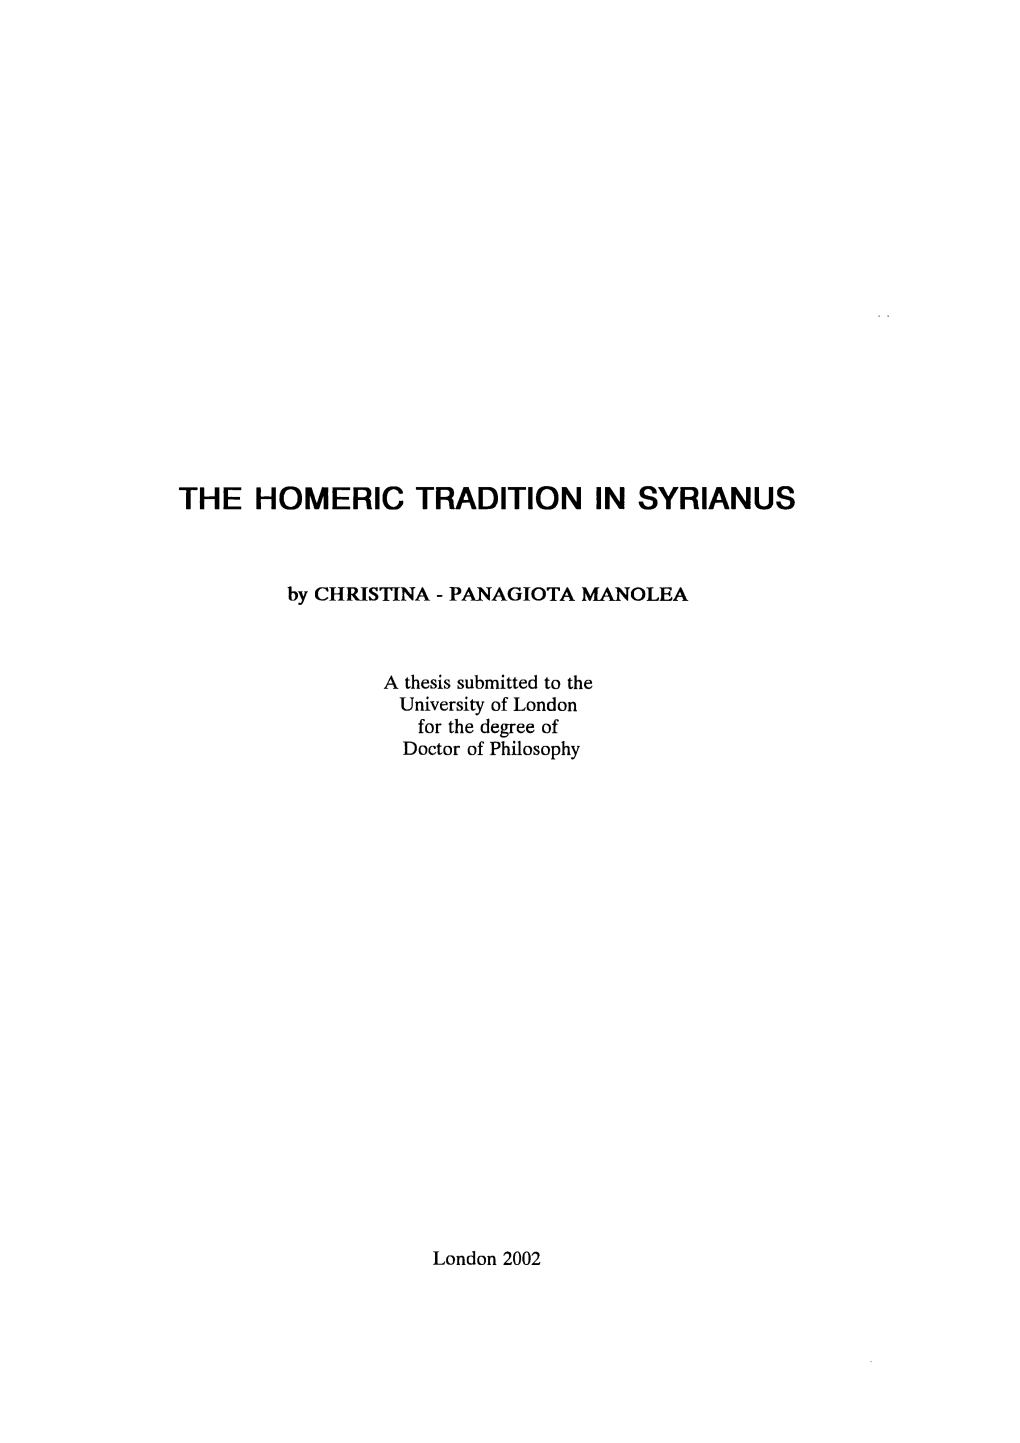 The Homeric Tradition in Syrianus